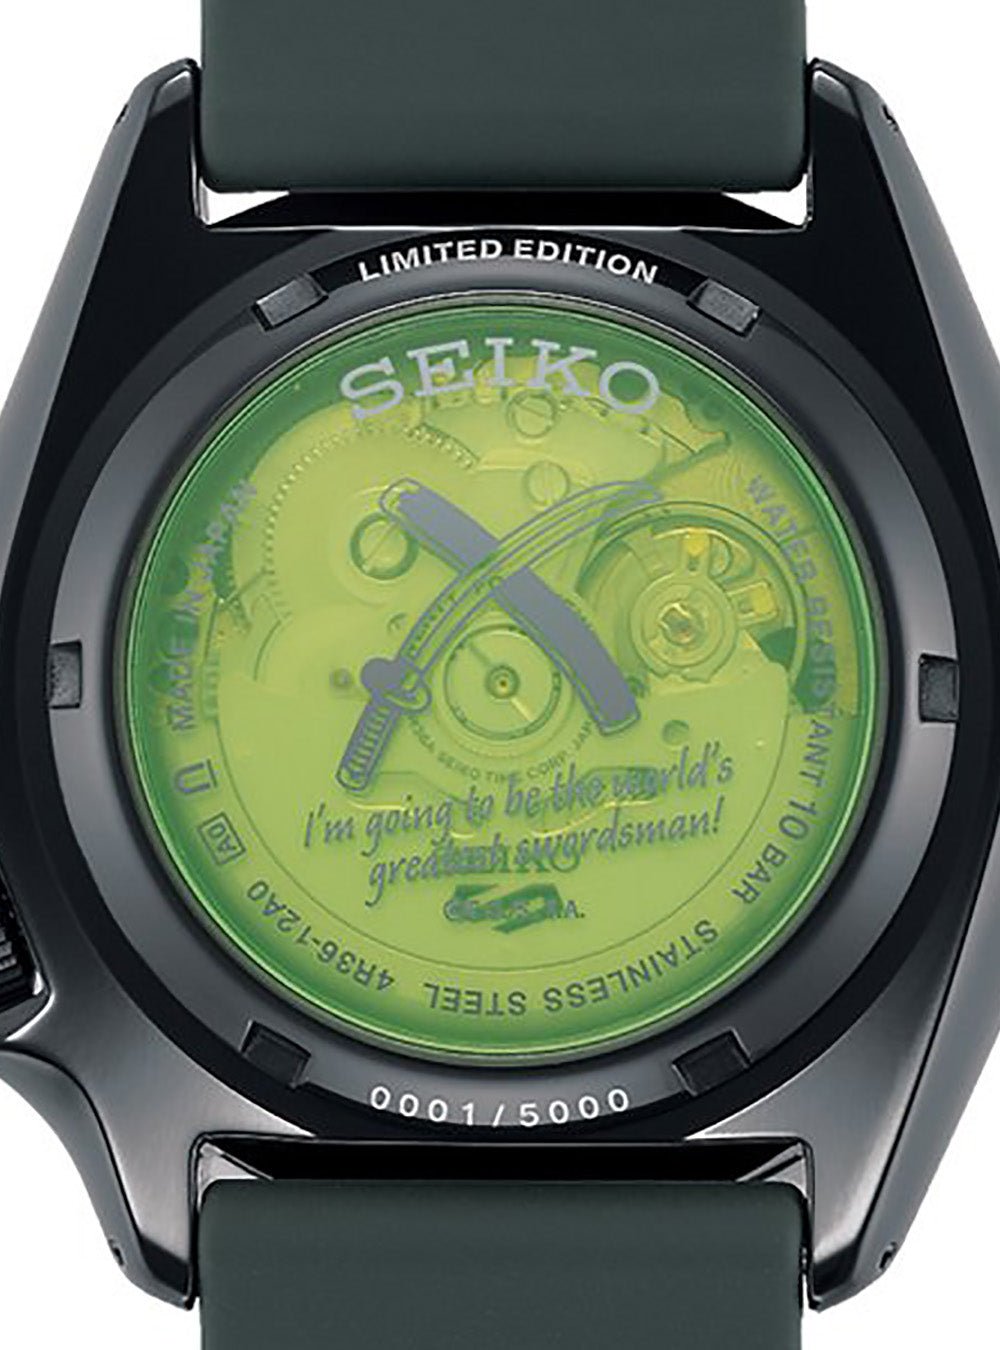 SEIKO 5 SPORTS ONE PIECE LIMITED EDITION ZORO SBSA153 MADE IN